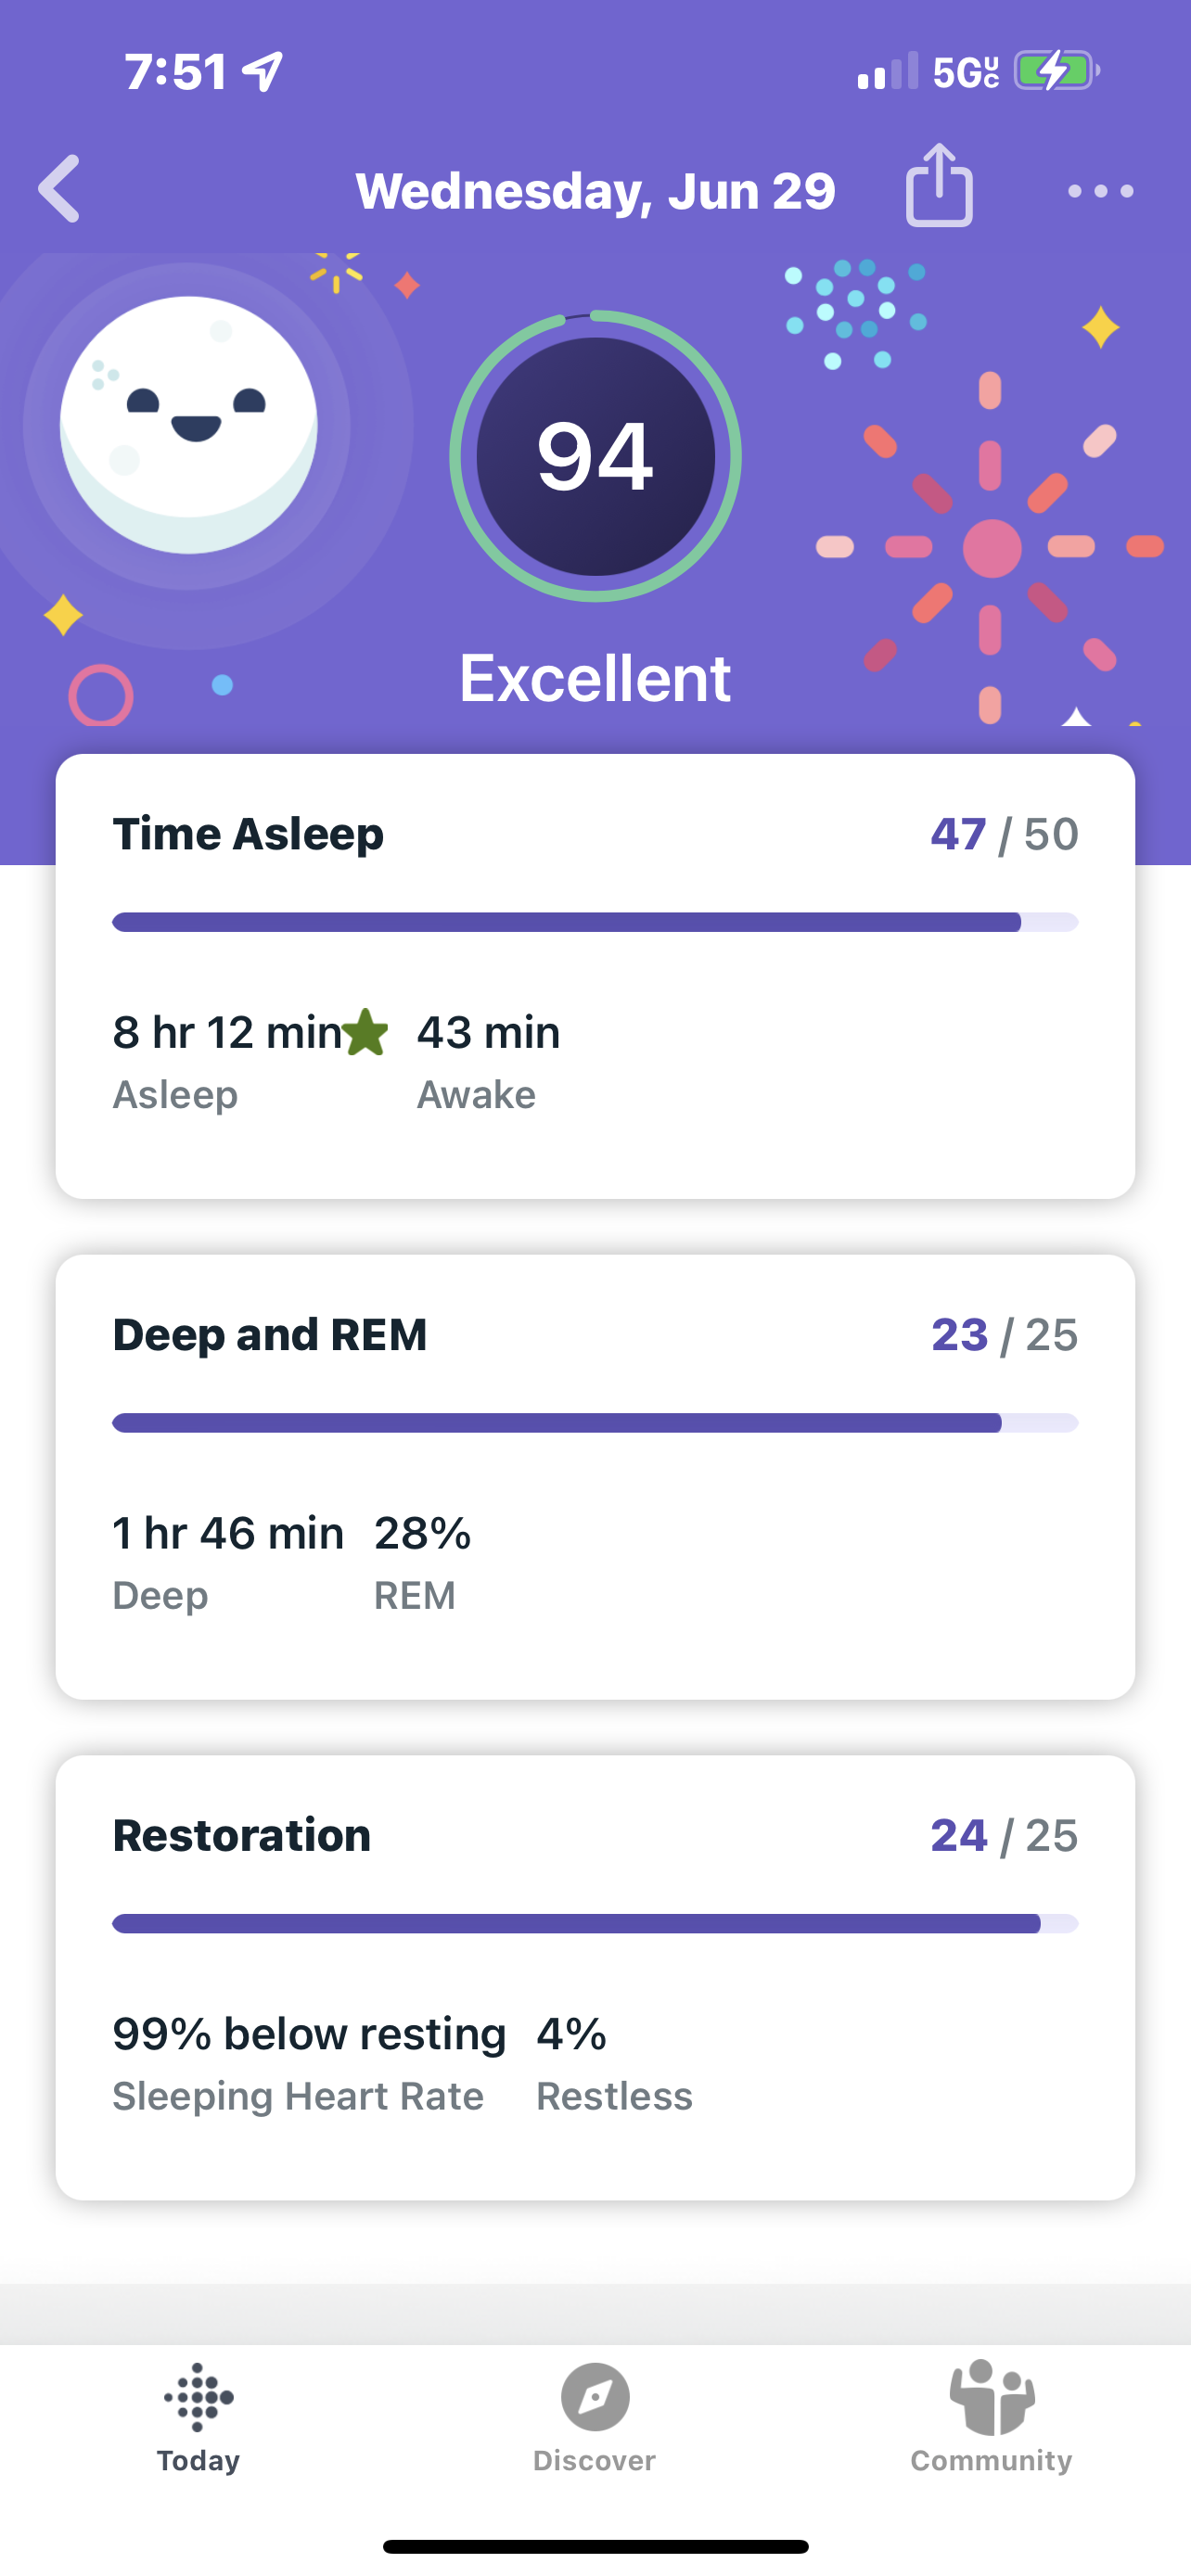 stivhed boksning overdrivelse What's your best sleep score? - Fitbit Community